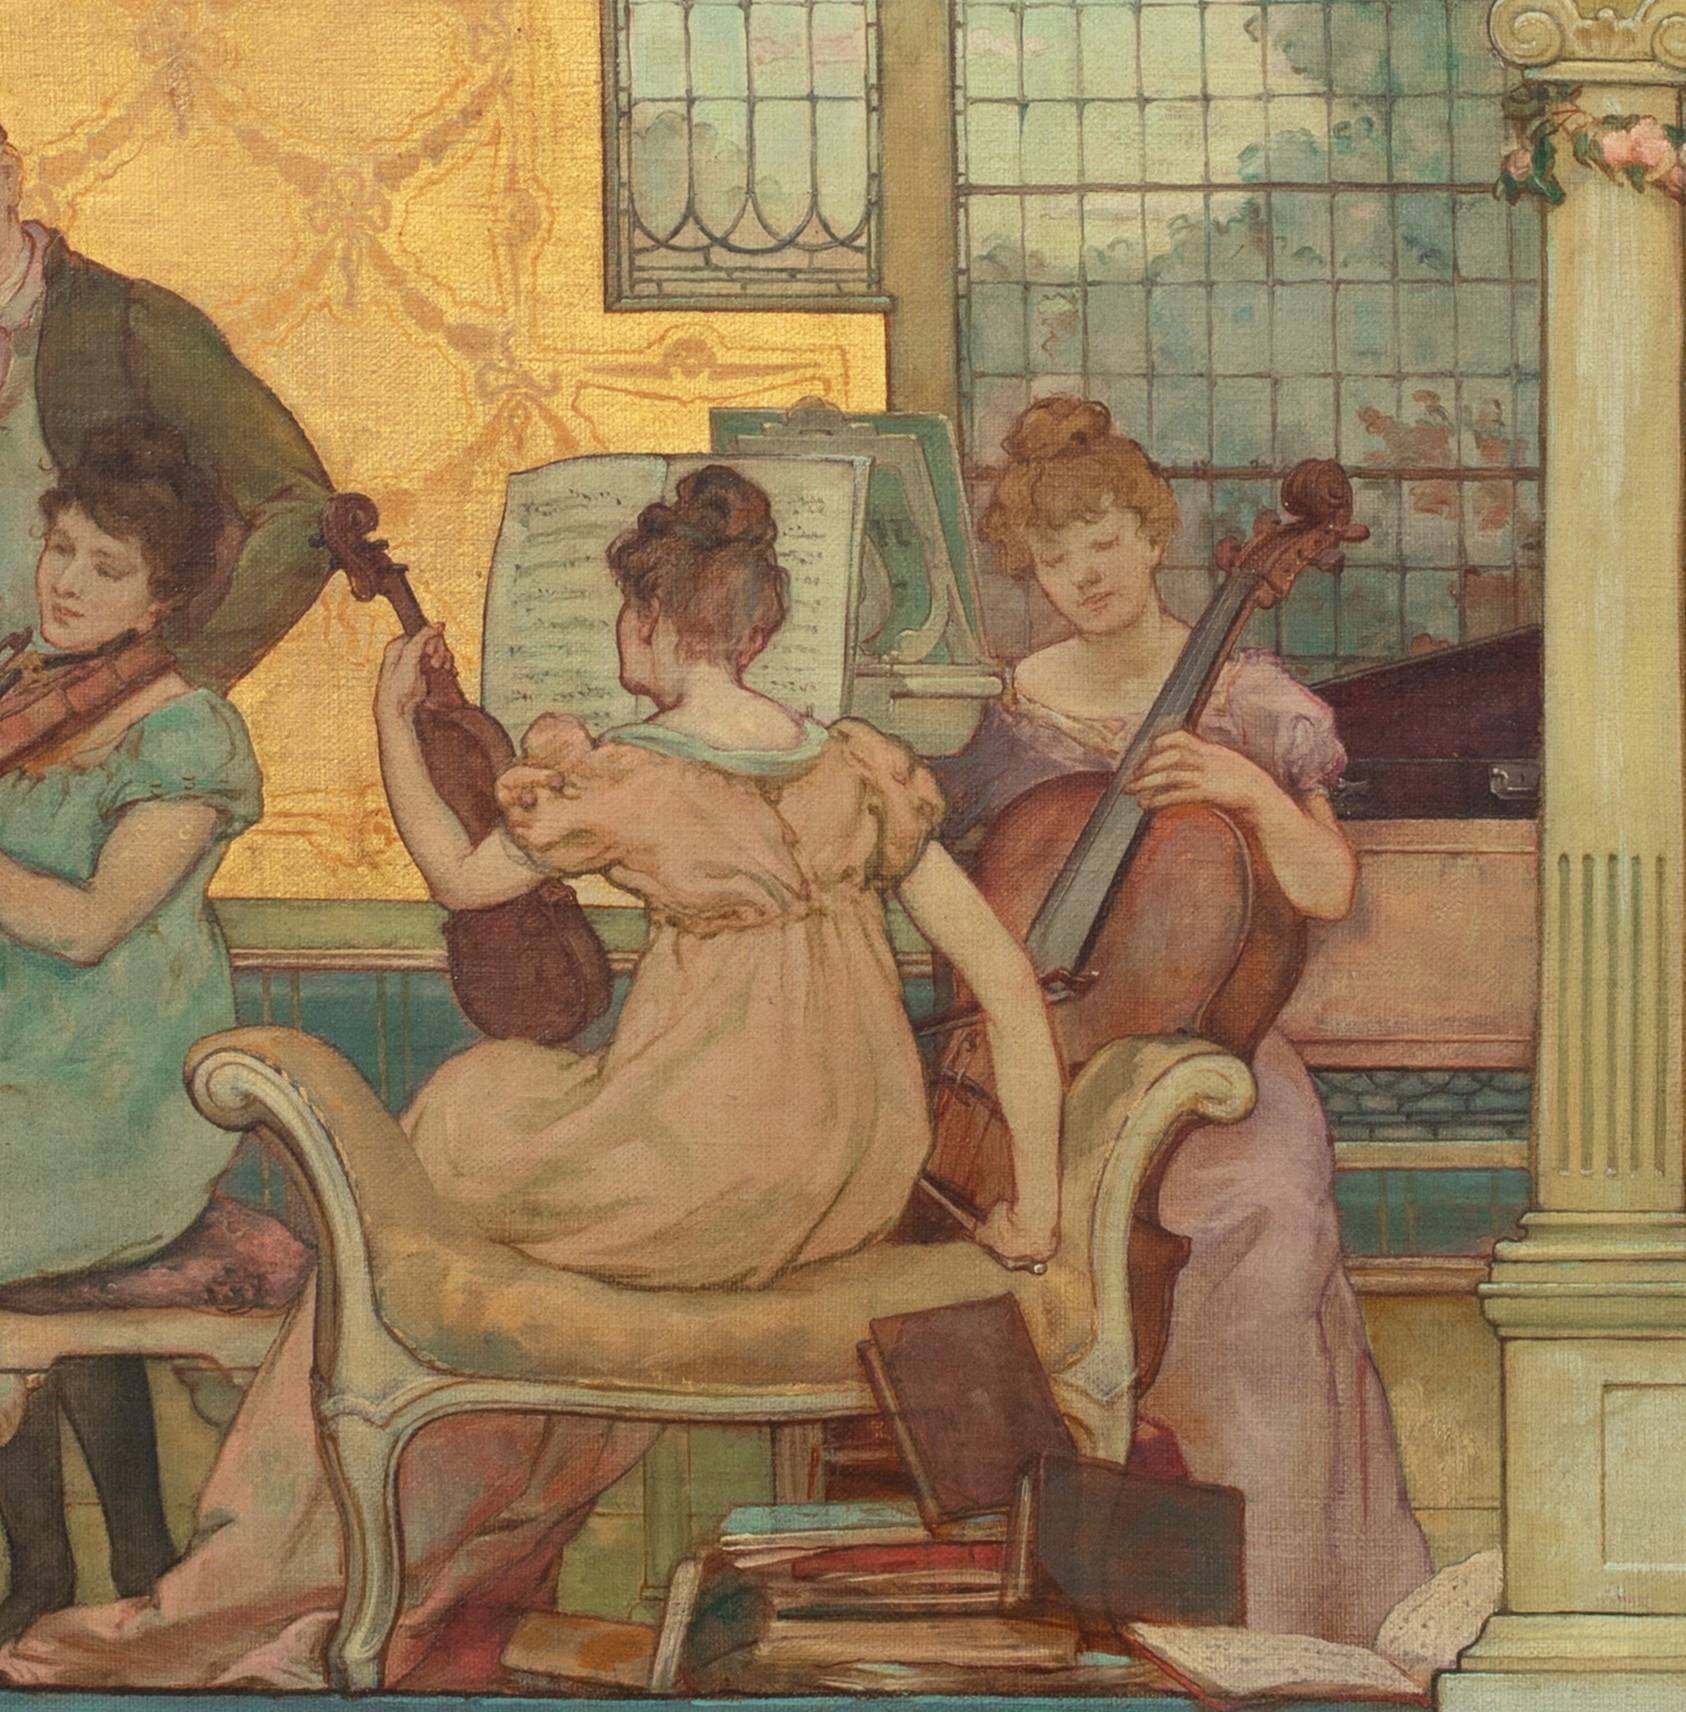 The String Quartet, 19th Century

by GERTRUDE HOMAN (1856-1905) Royal Academy Exhibited

19th Century Interior scene of a string quartet recital, oil on canvas by Gertrude Homan. Excellent quality and condition panoramic interior of a string quartet